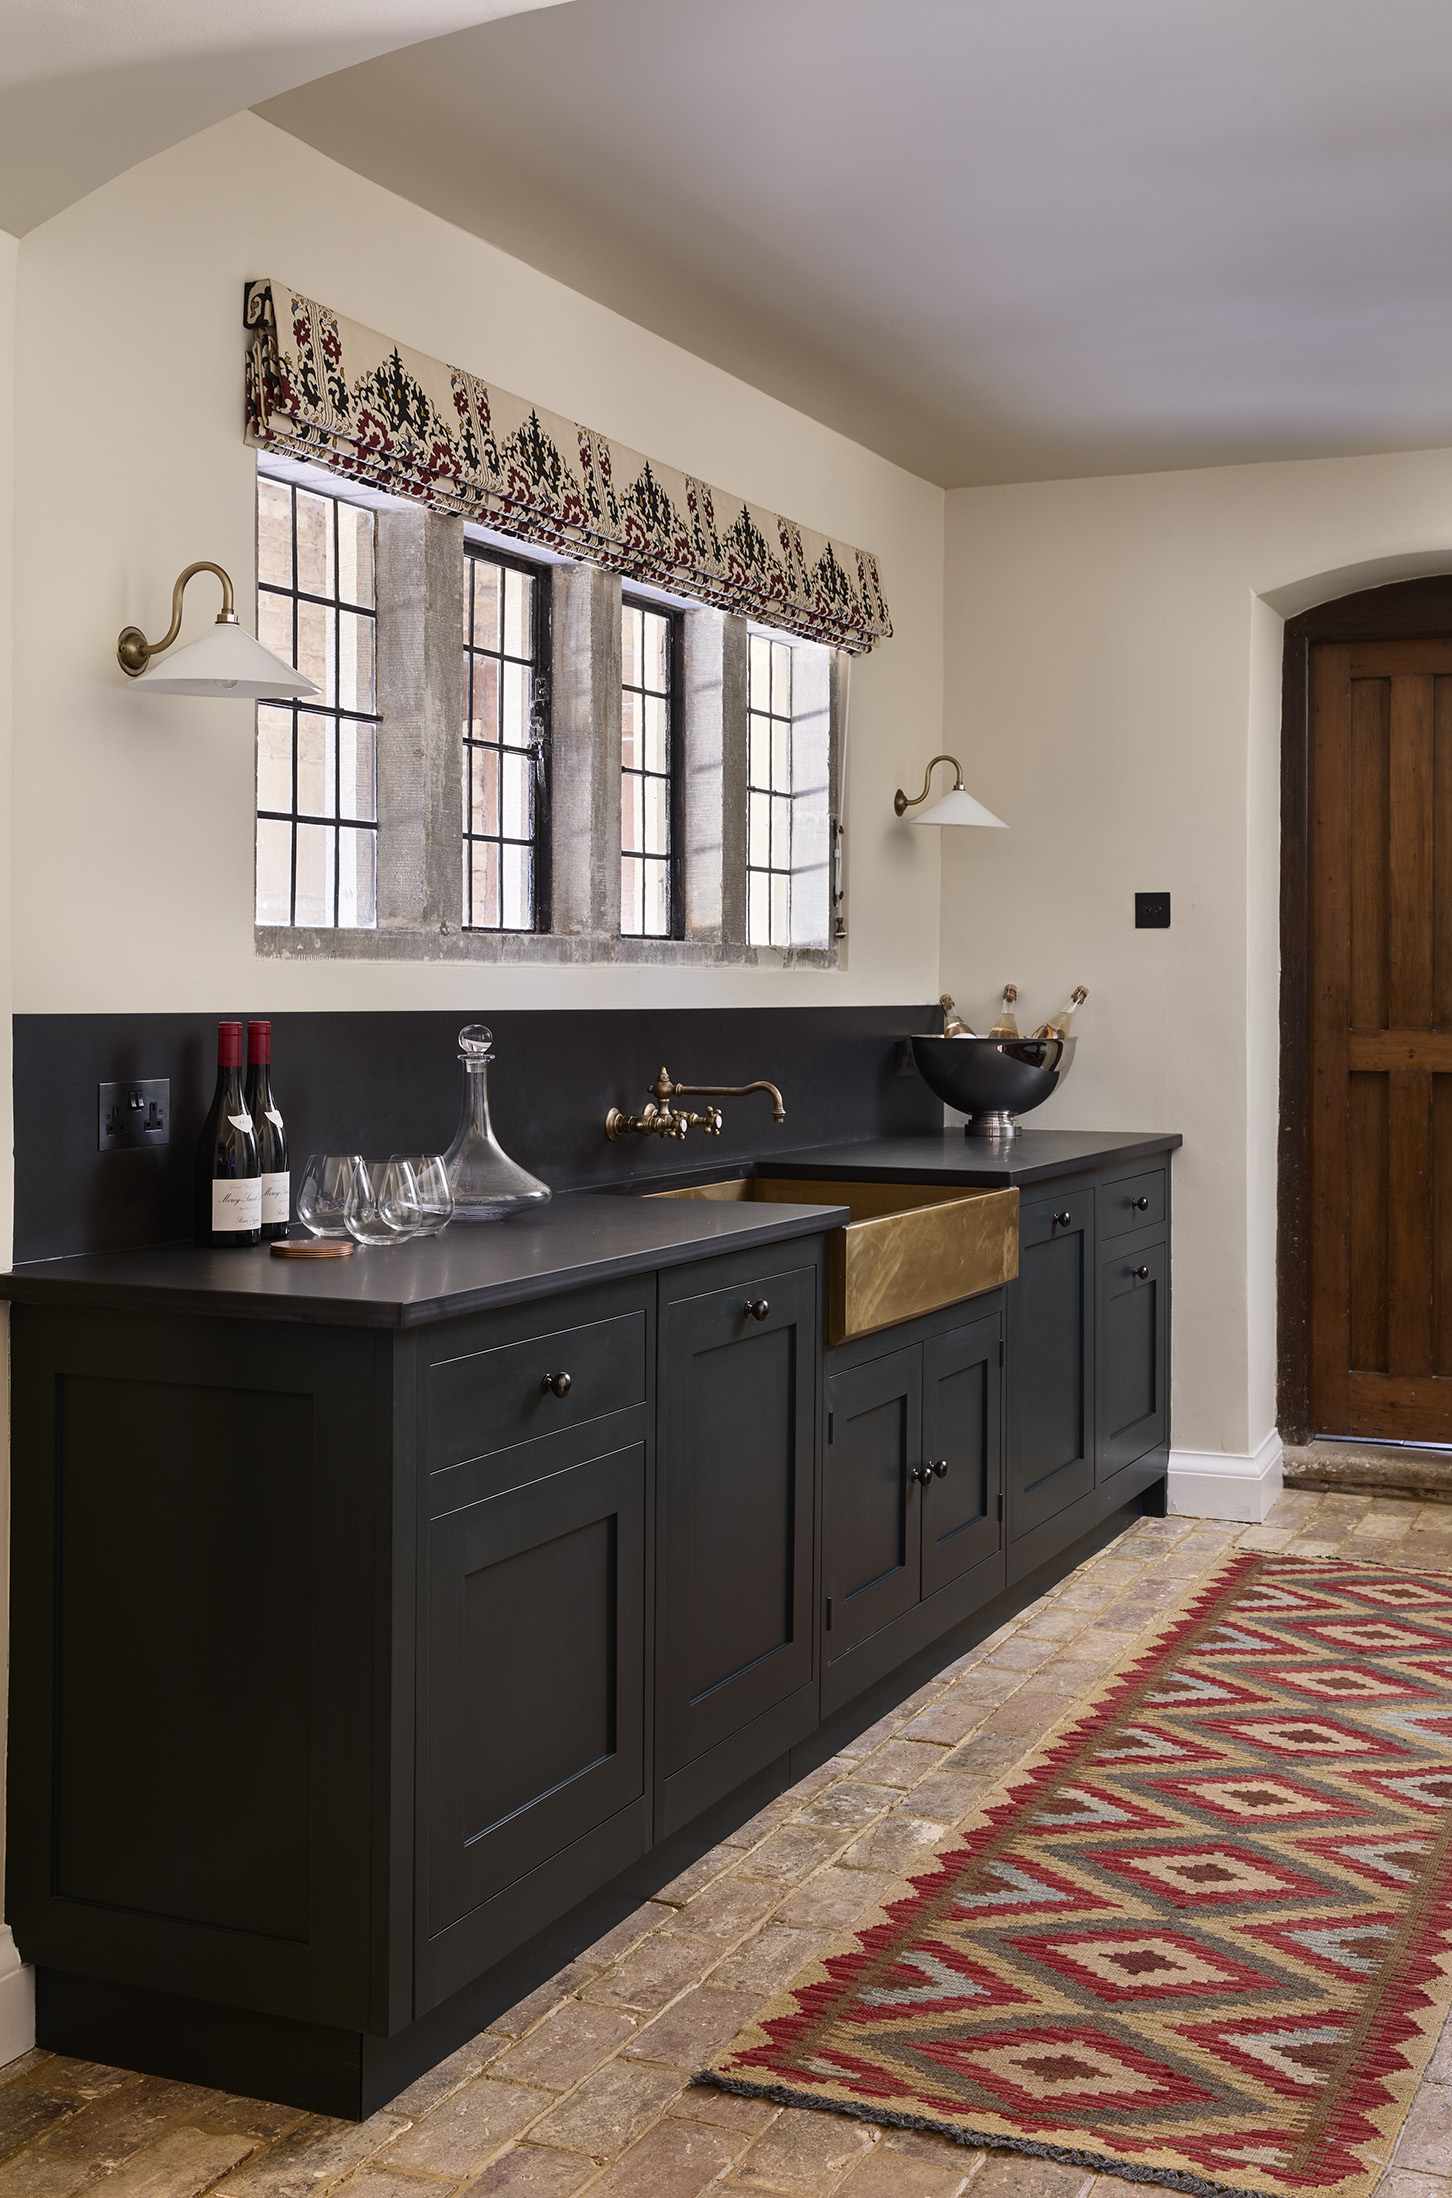 A run of dark grey traditional base cabinets with a large copper rectangular sink, decorative wall lights, & traditional red runner